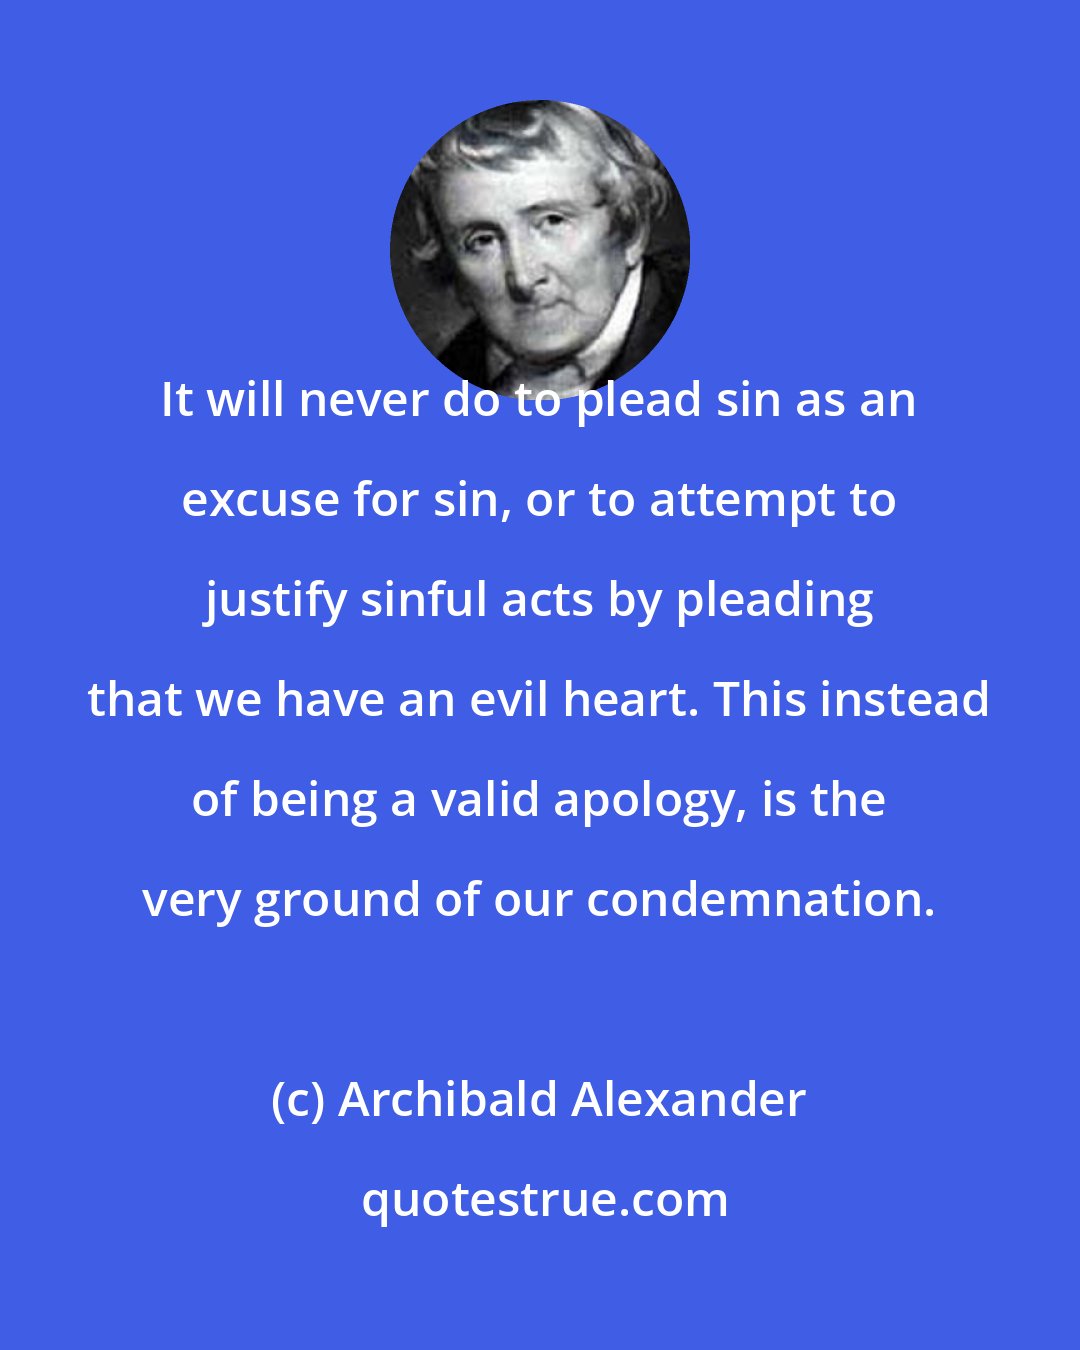 Archibald Alexander: It will never do to plead sin as an excuse for sin, or to attempt to justify sinful acts by pleading that we have an evil heart. This instead of being a valid apology, is the very ground of our condemnation.